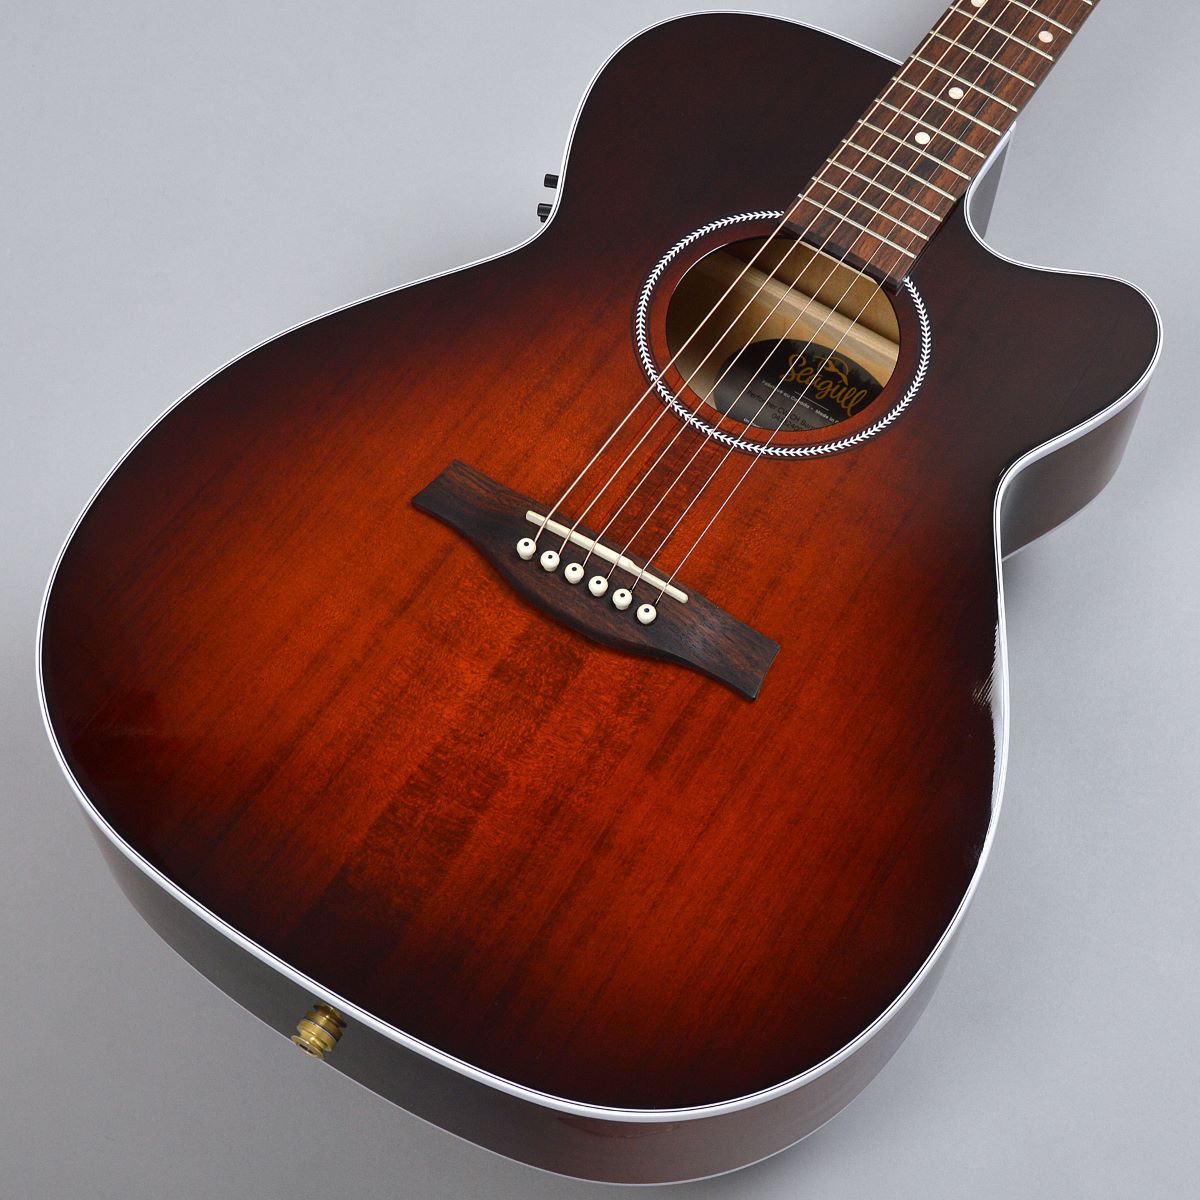 Seagull Performer CW Concert Hall Burnt Umber QIT エレアコギター ...